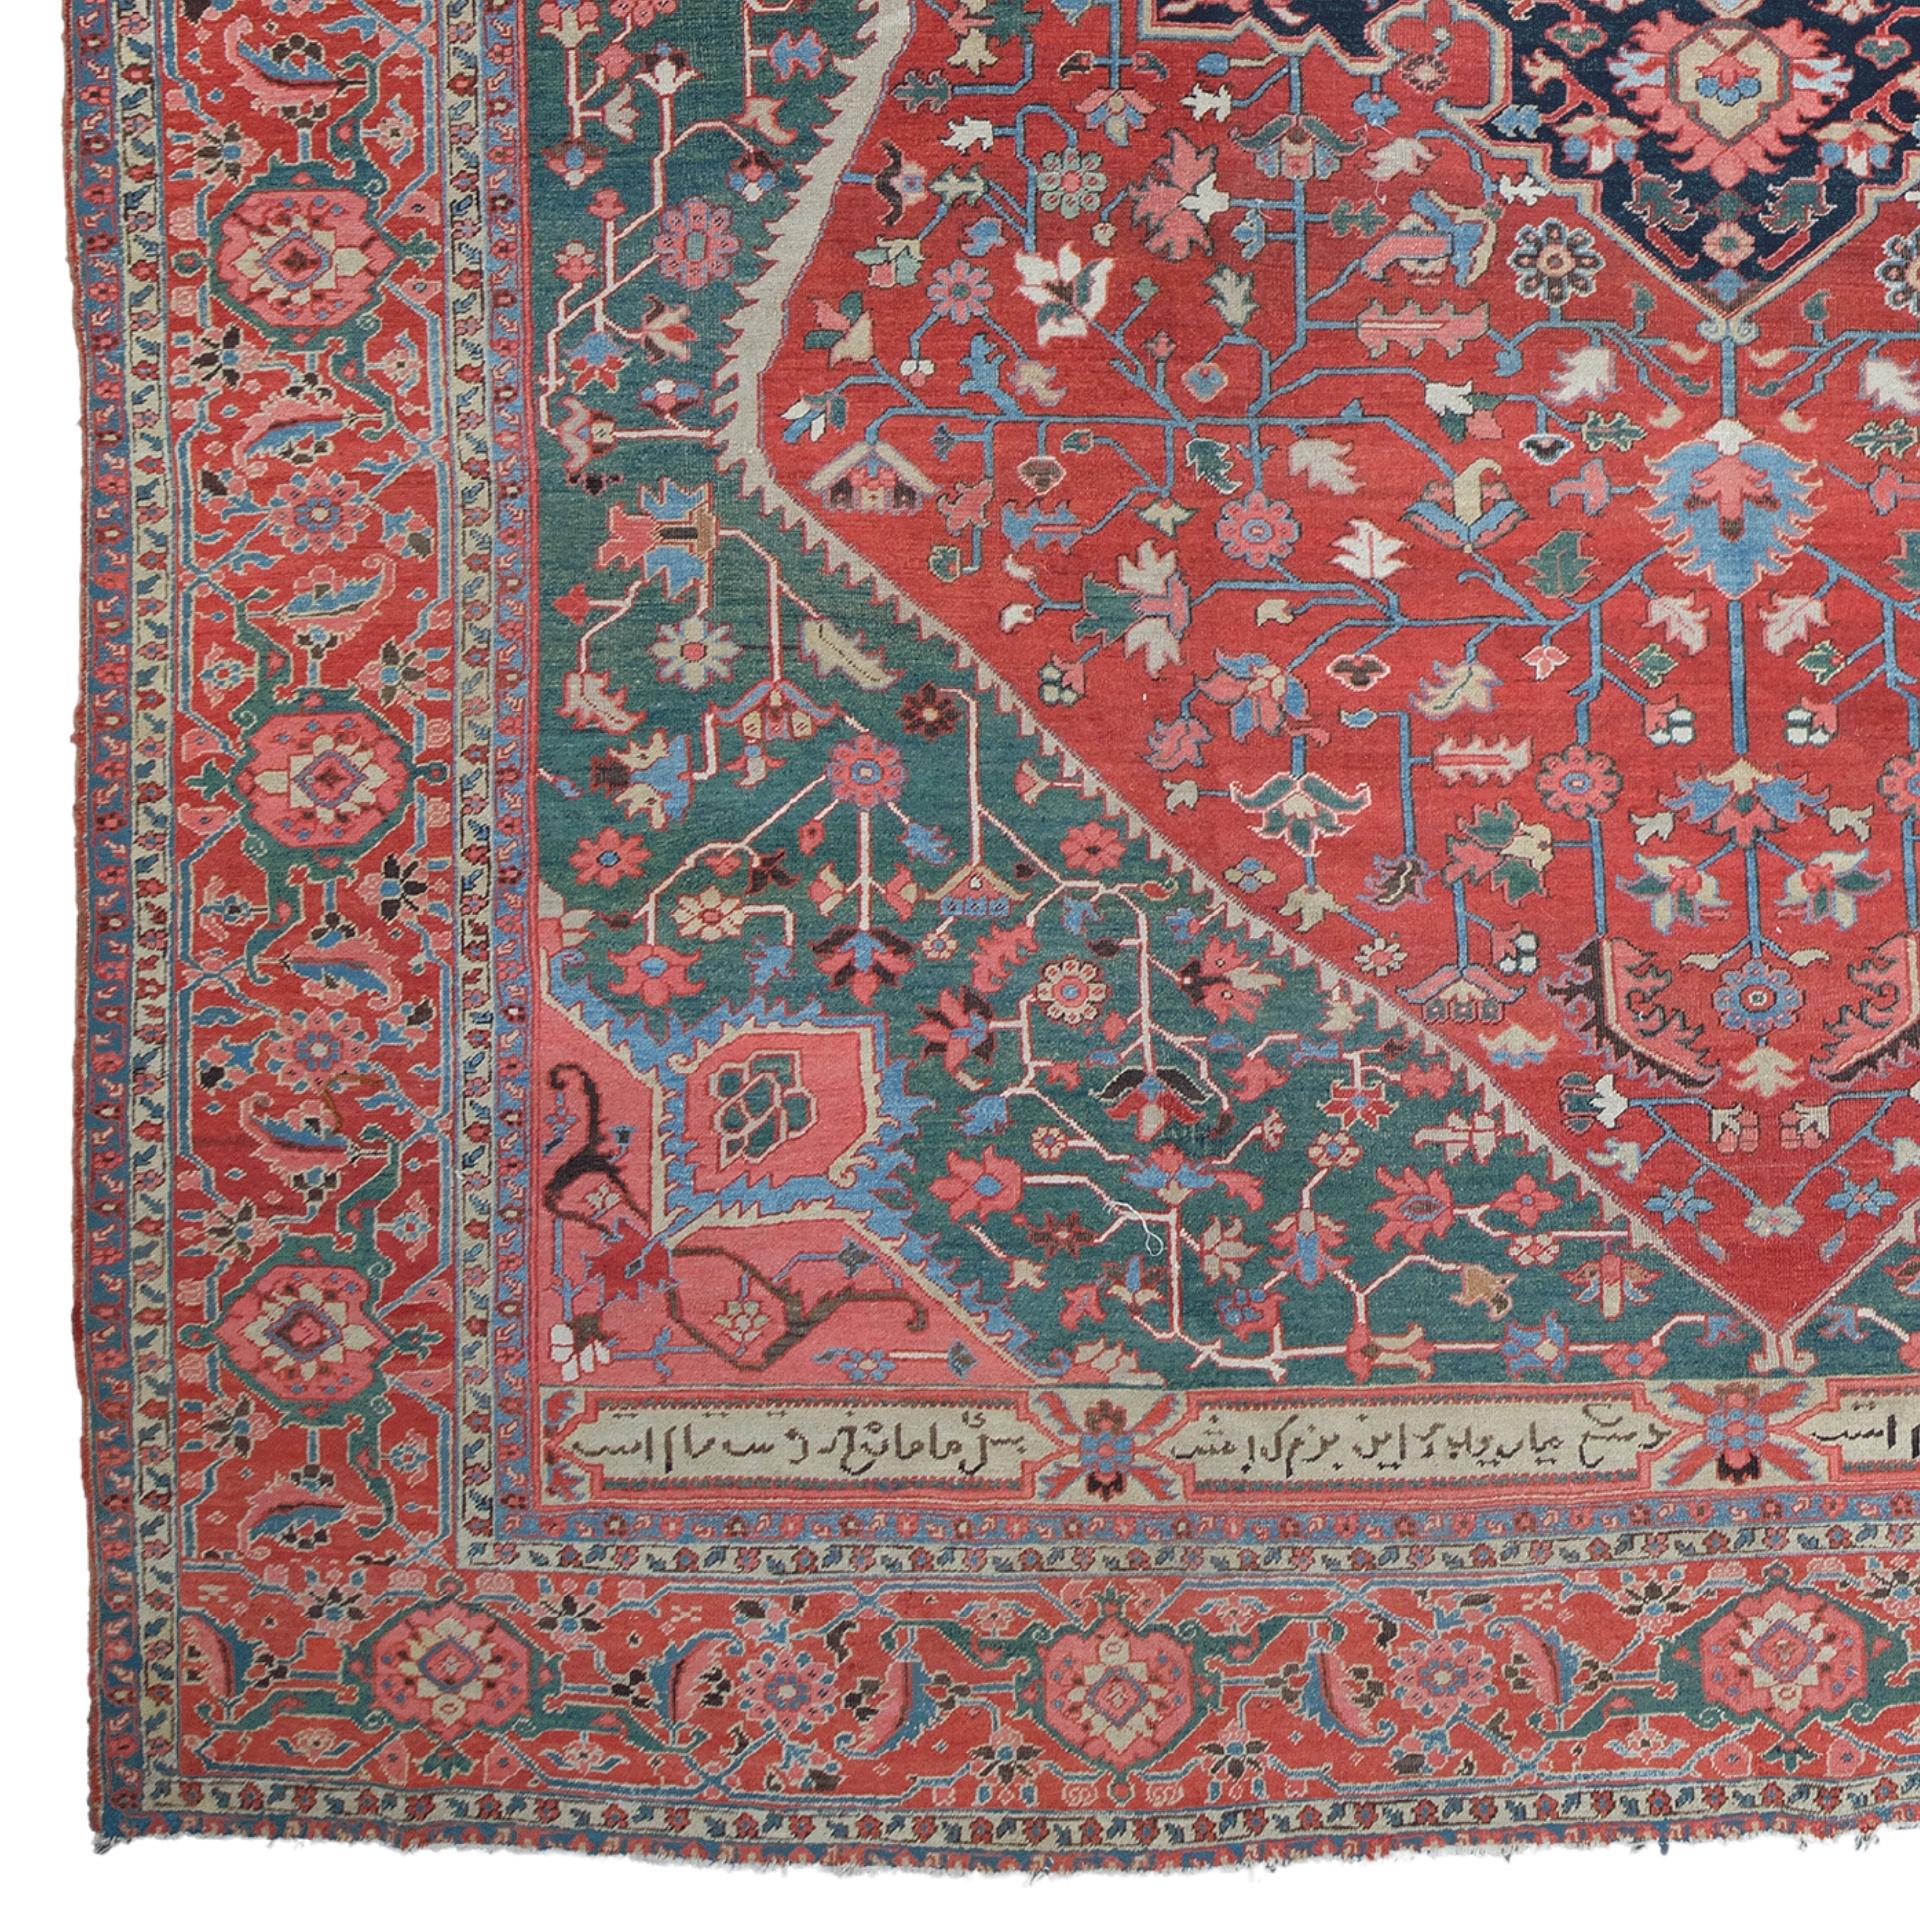 This antique serapi carpet is a magnificent work that will allow you to establish a connection between art and history. This 19th-century rug is hand-woven with precision and care, with each thread telling the story of an era. Its eye-catching color